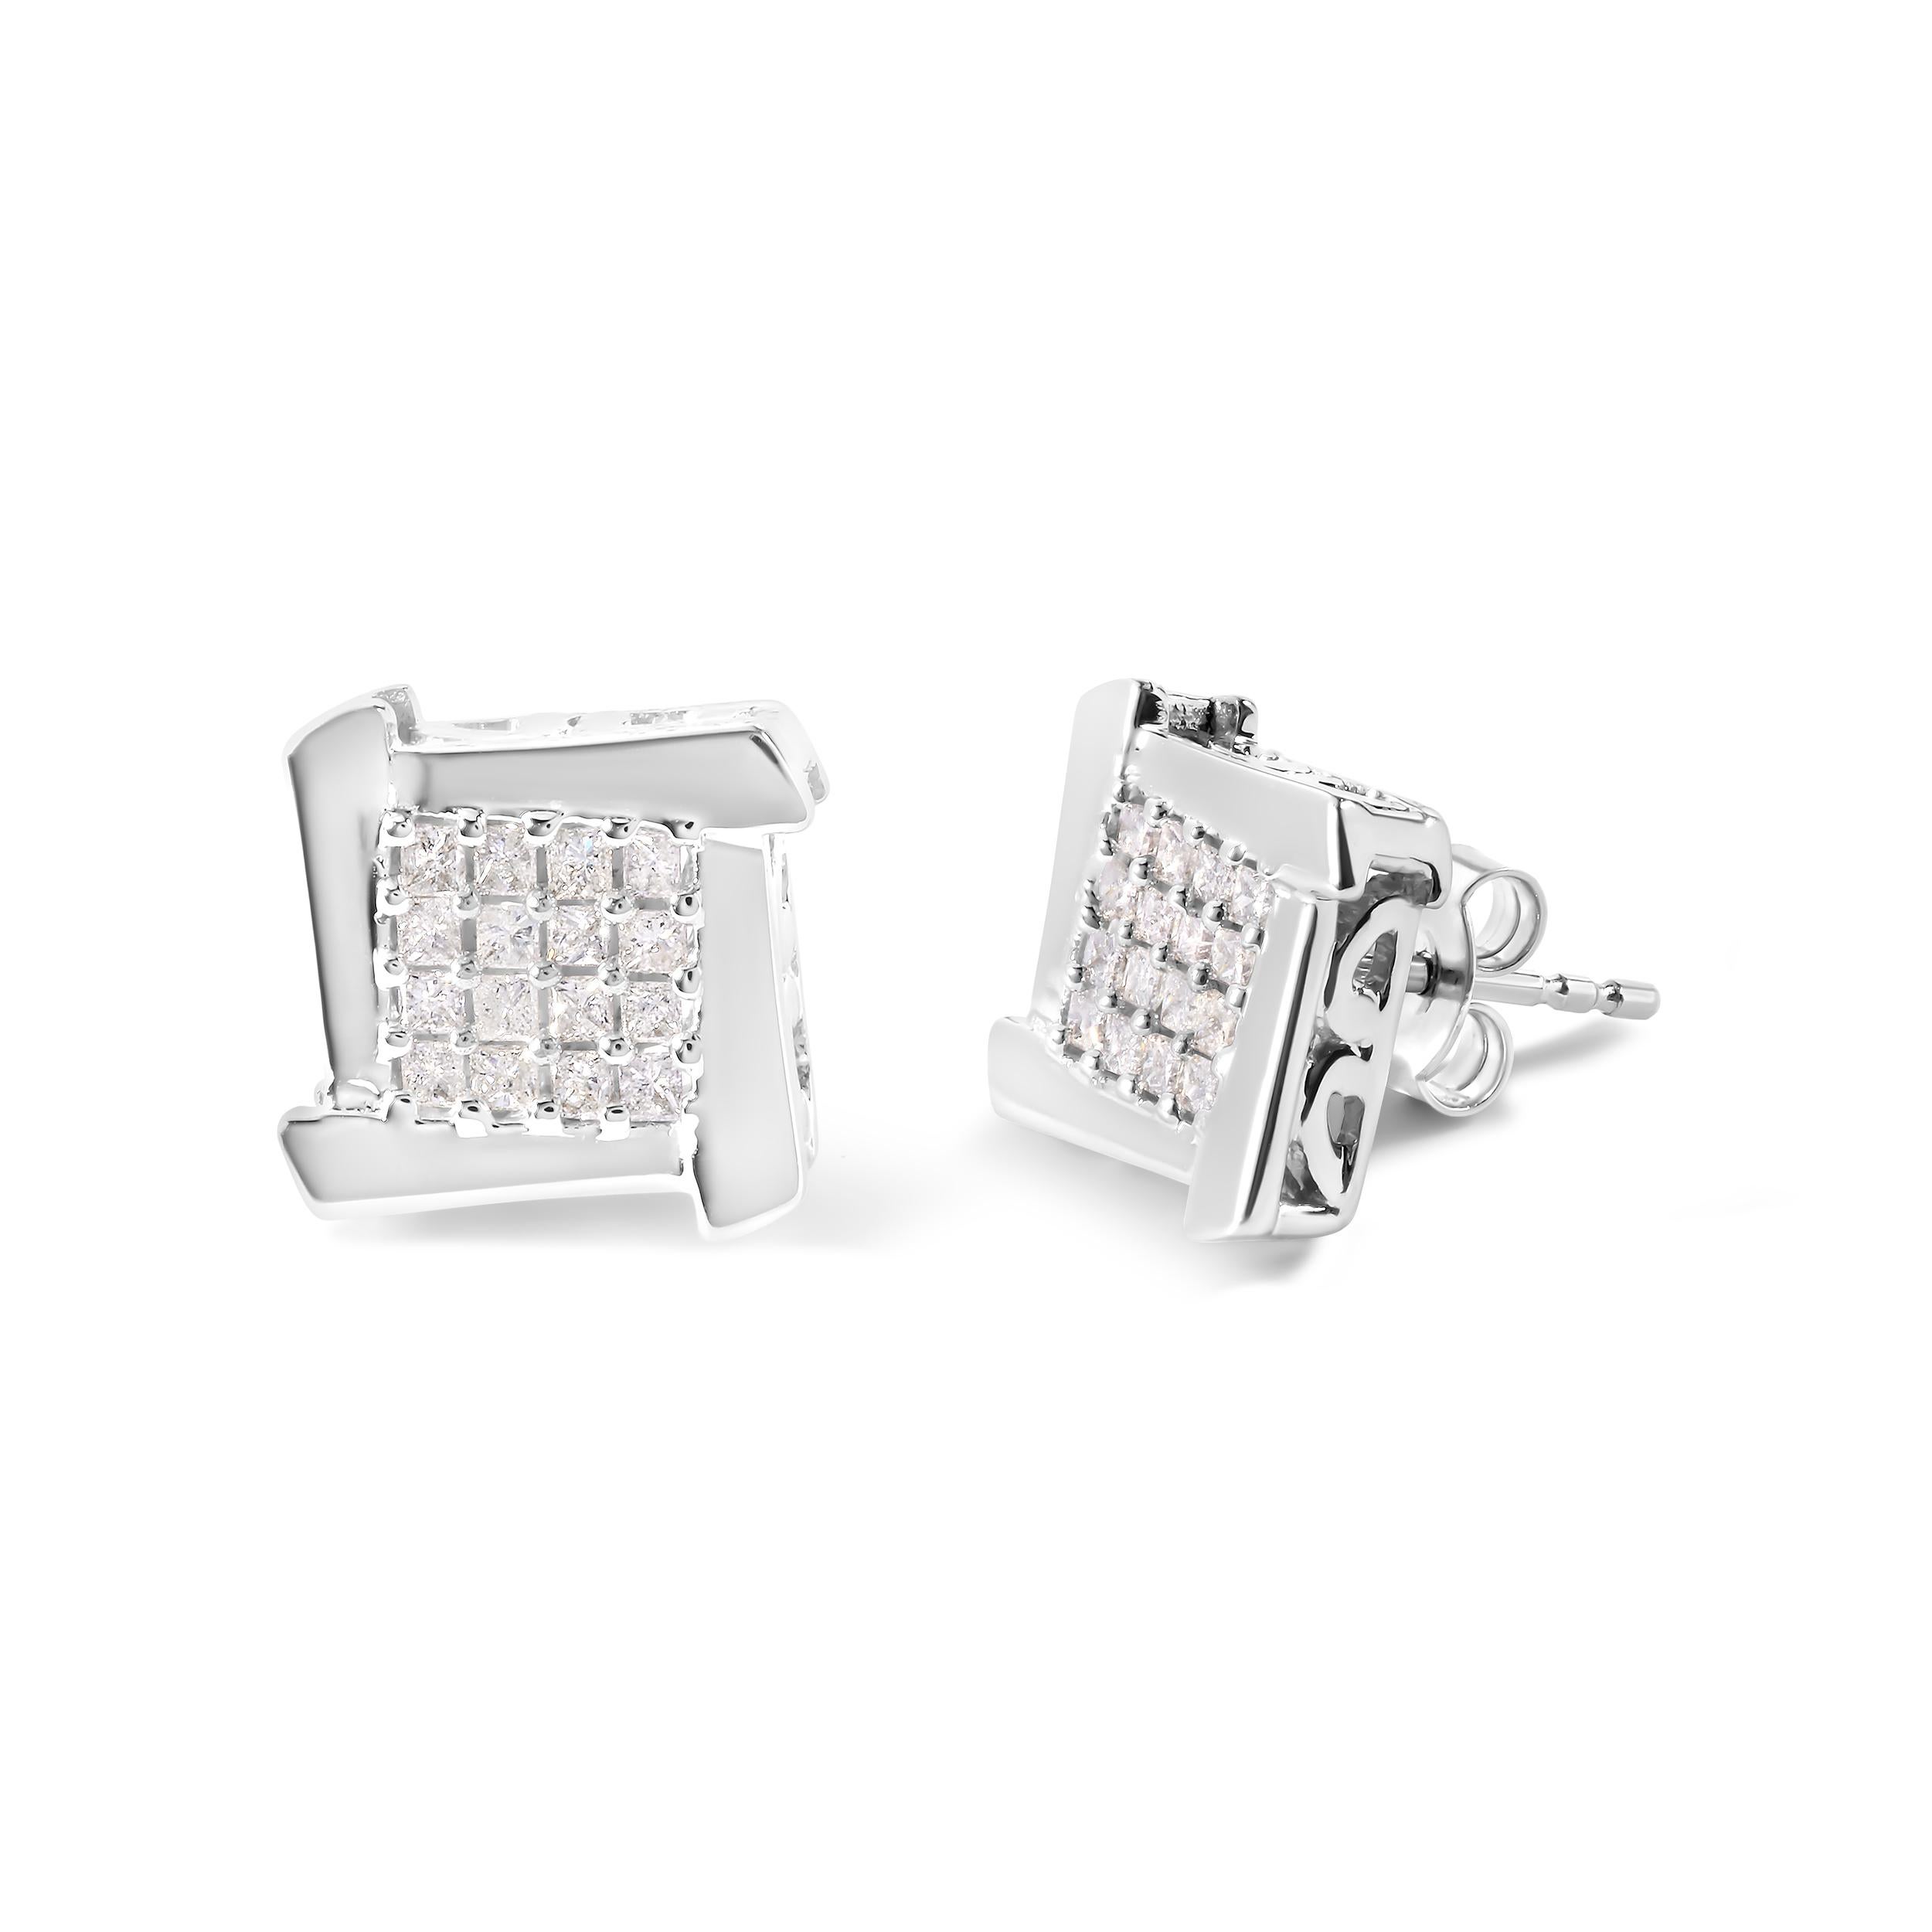 Indulge in the elegance and sophistication of these gorgeous diamond composite stud earrings. Crafted from 10K white gold, these earrings boast a stunning design of square and swirl shapes that are sure to turn heads. Featuring 32 natural princess